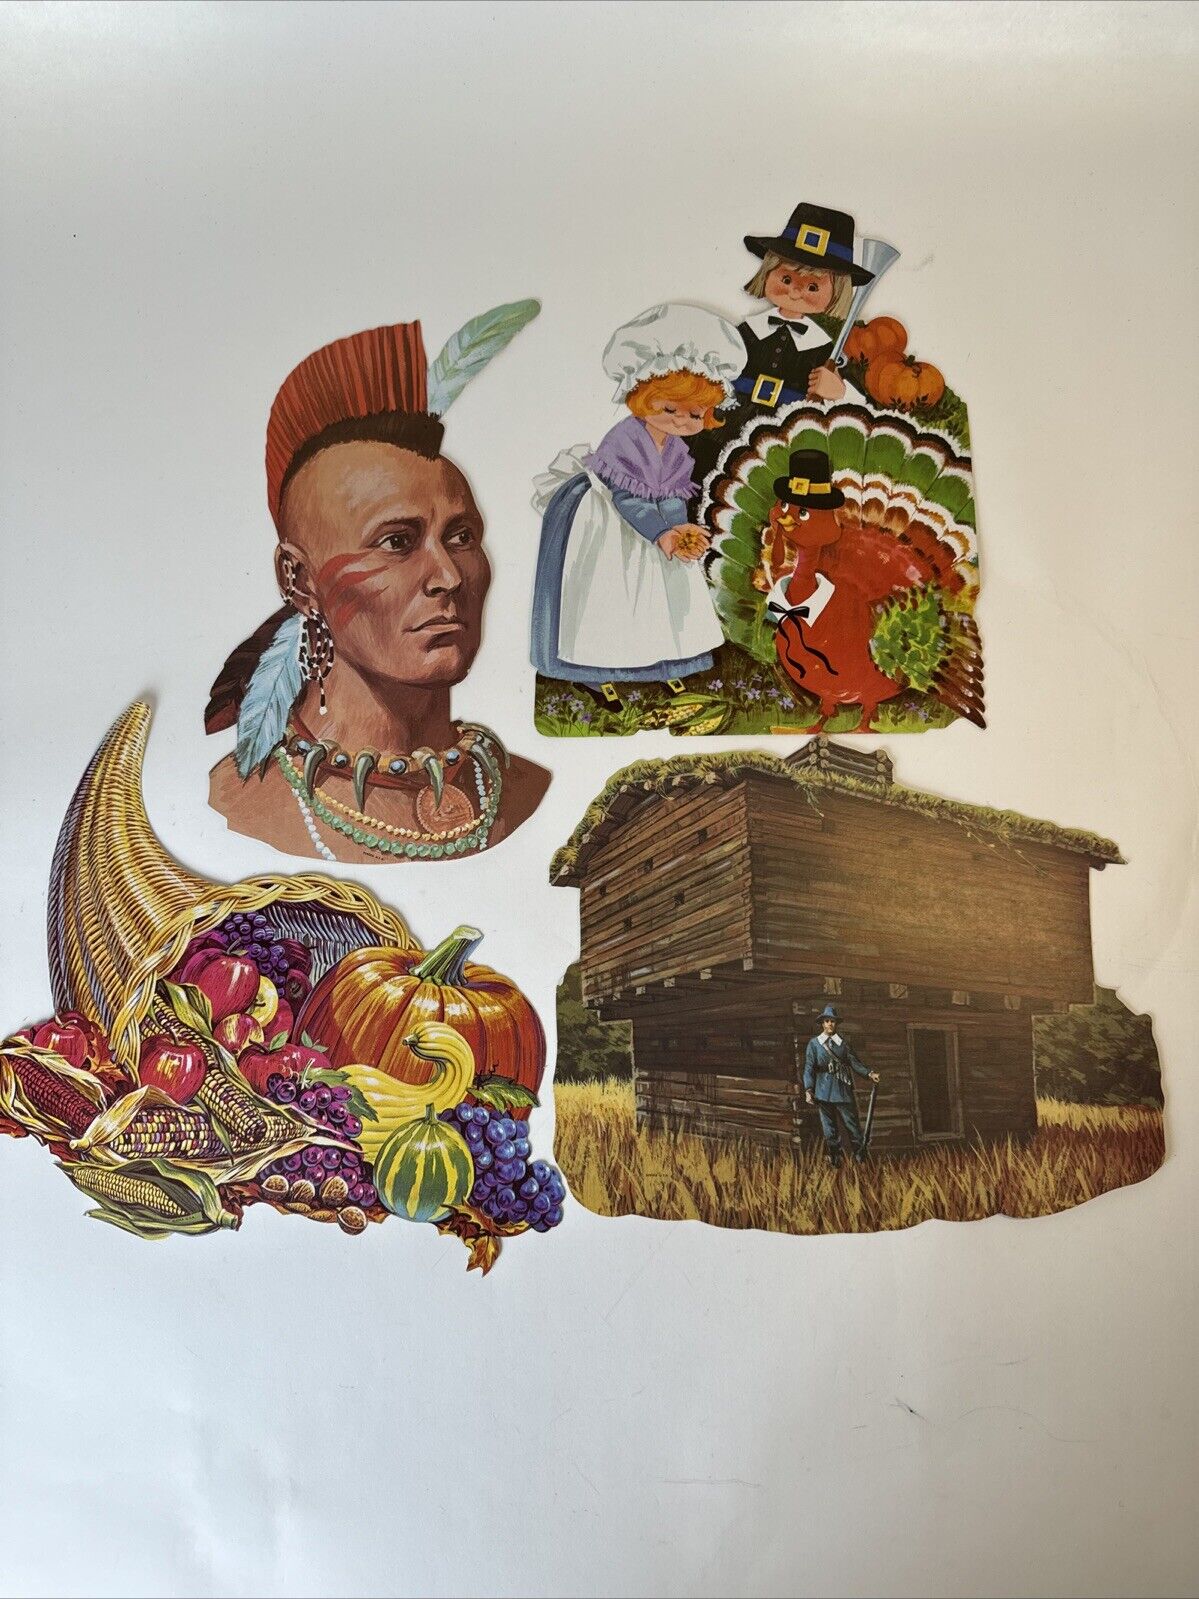 Lot of 4 Vintage Thanksgiving Die Cut Paper Decorations Wall Window Decor USA